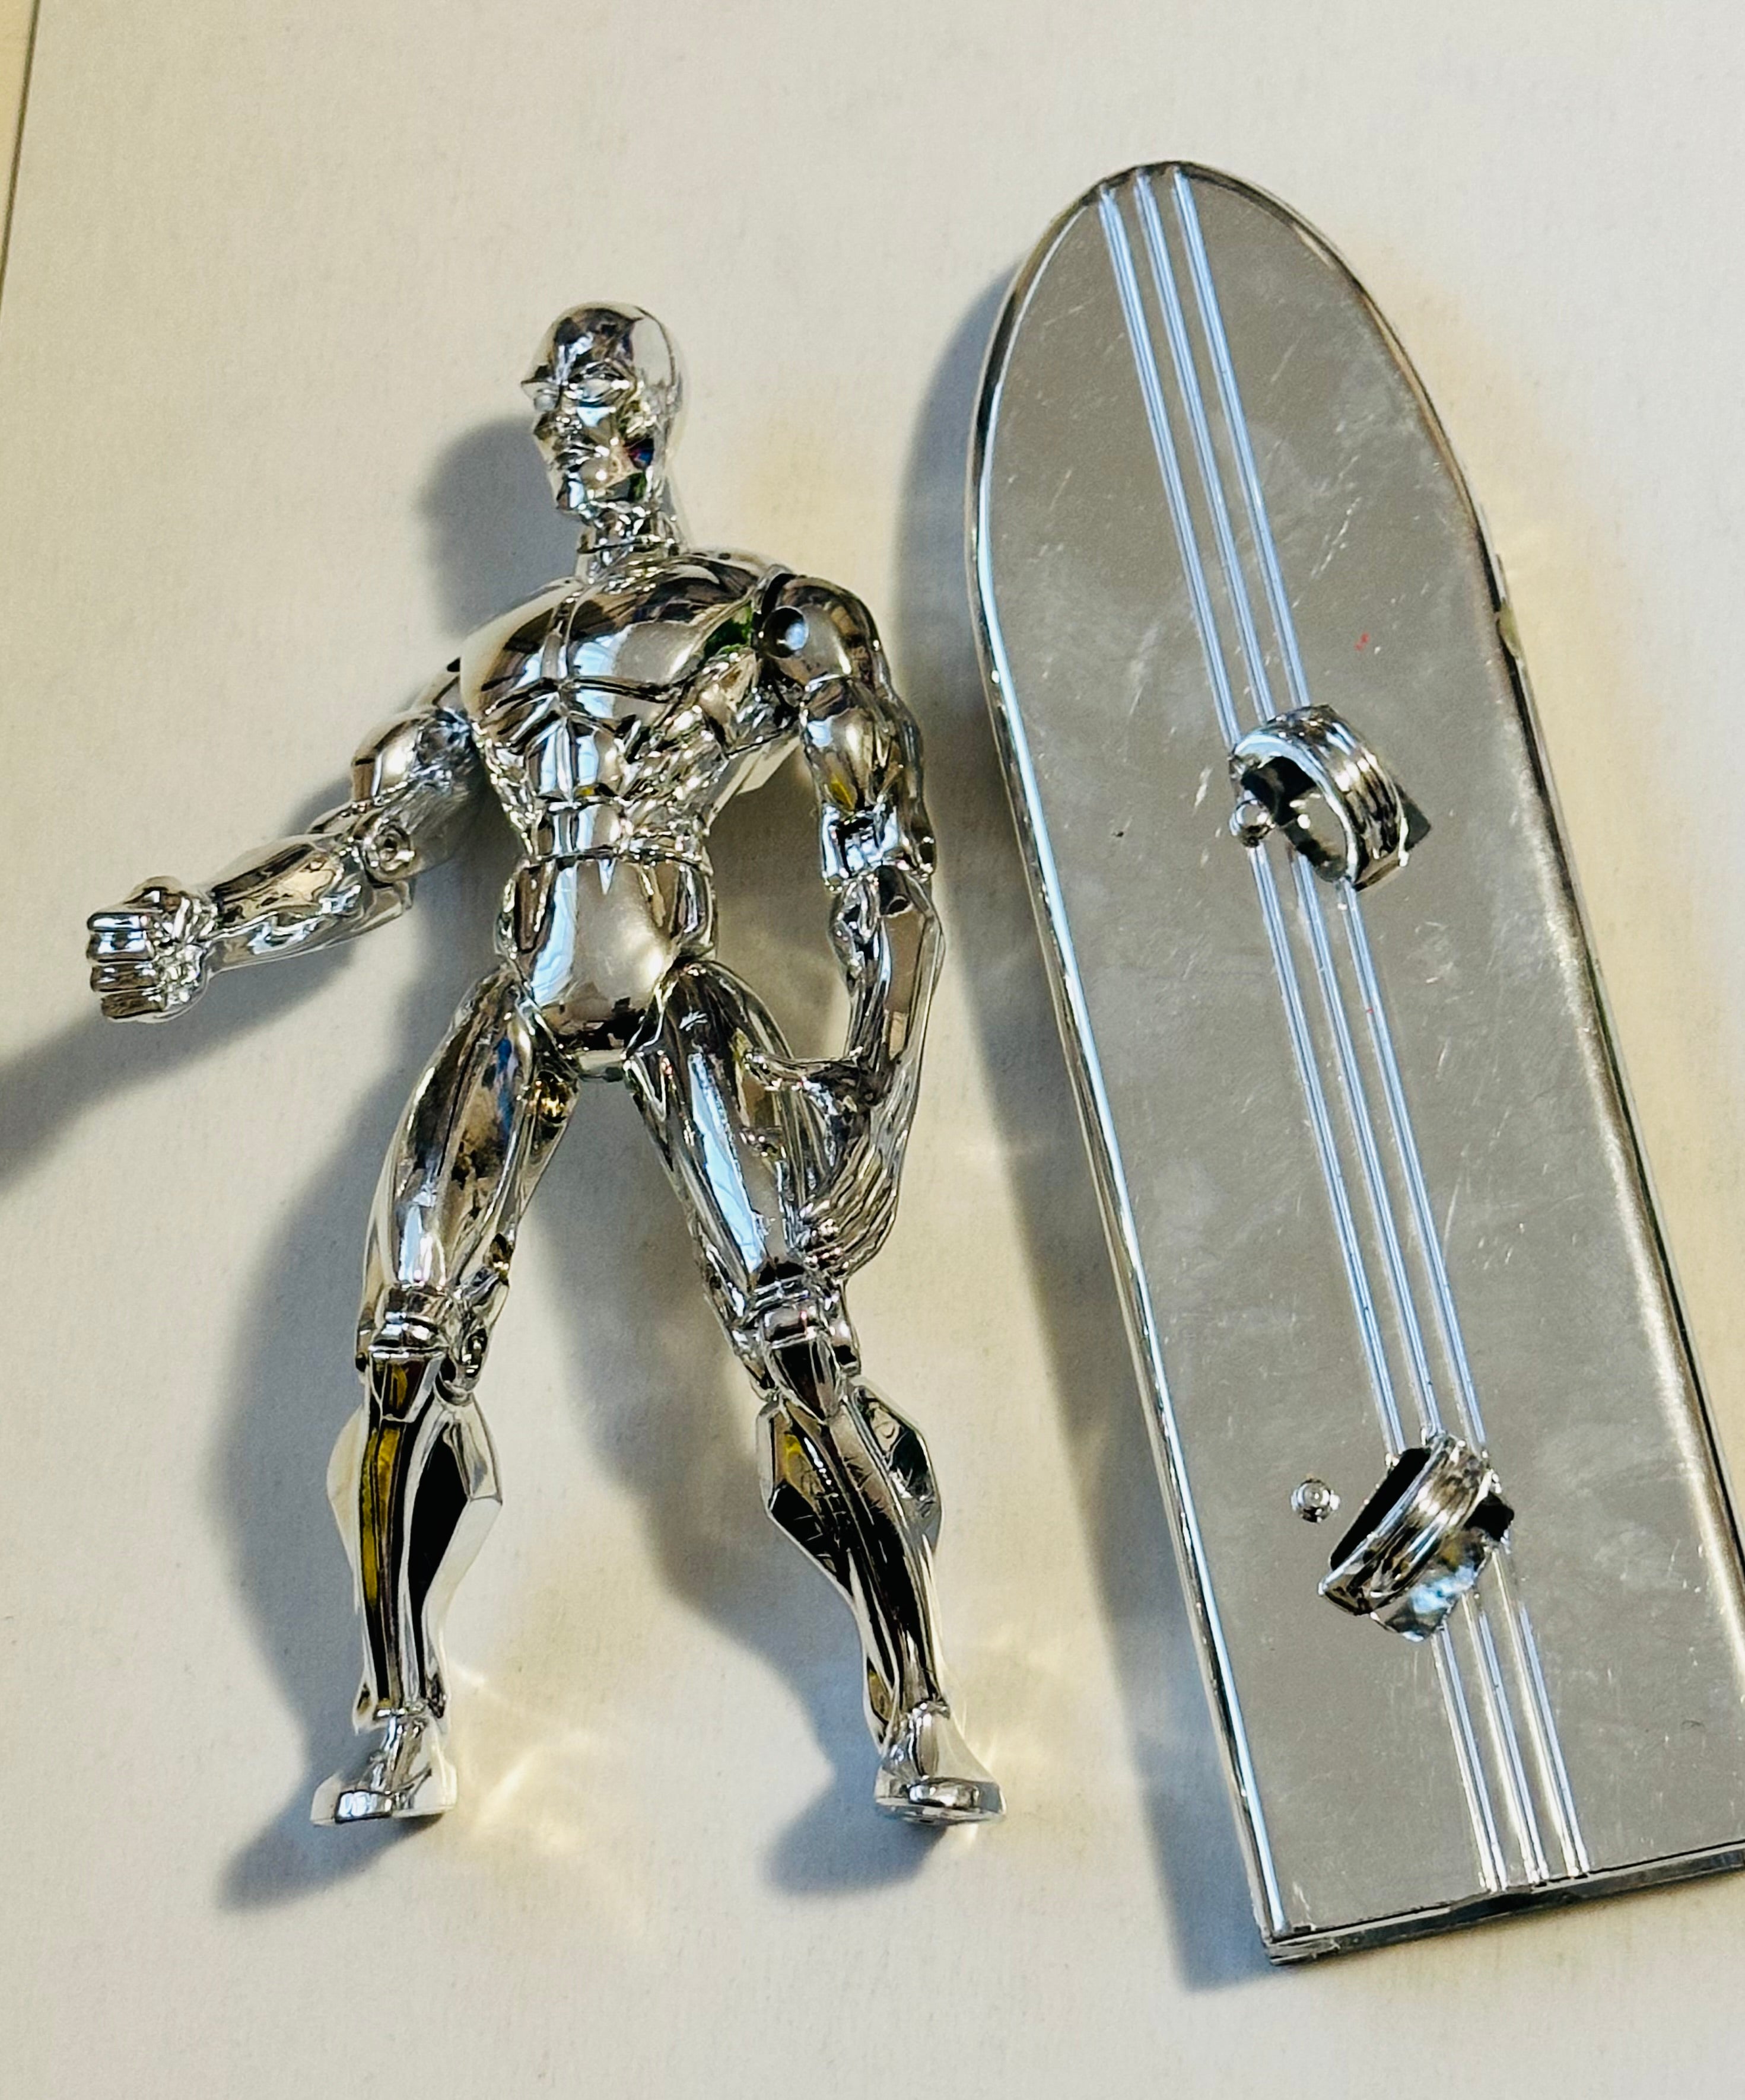 Silver surfer marvel, superhero vintage toy with surfboard 1980s